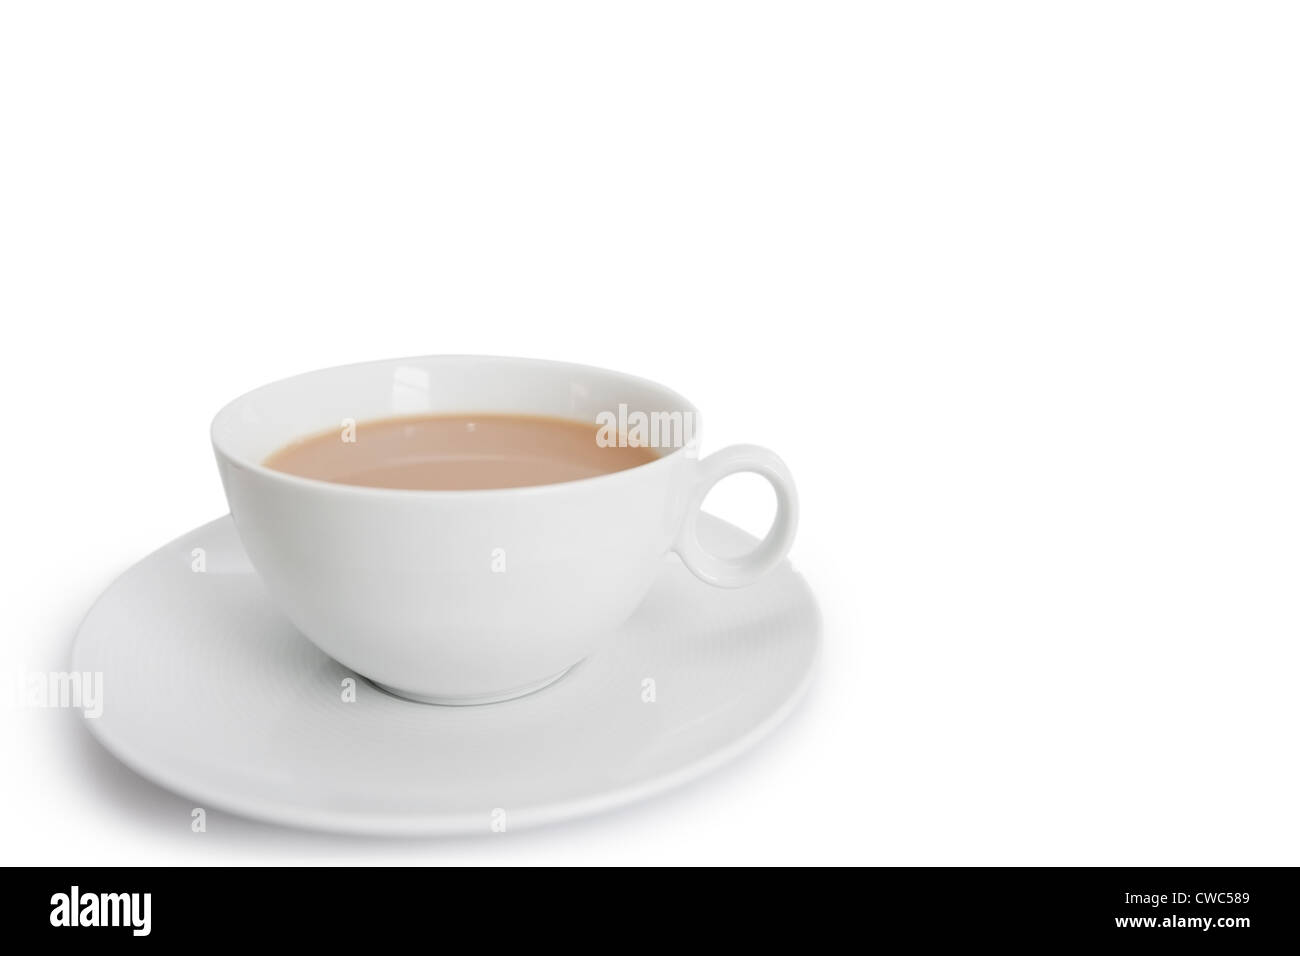 Close-up of teacup over white background Stock Photo